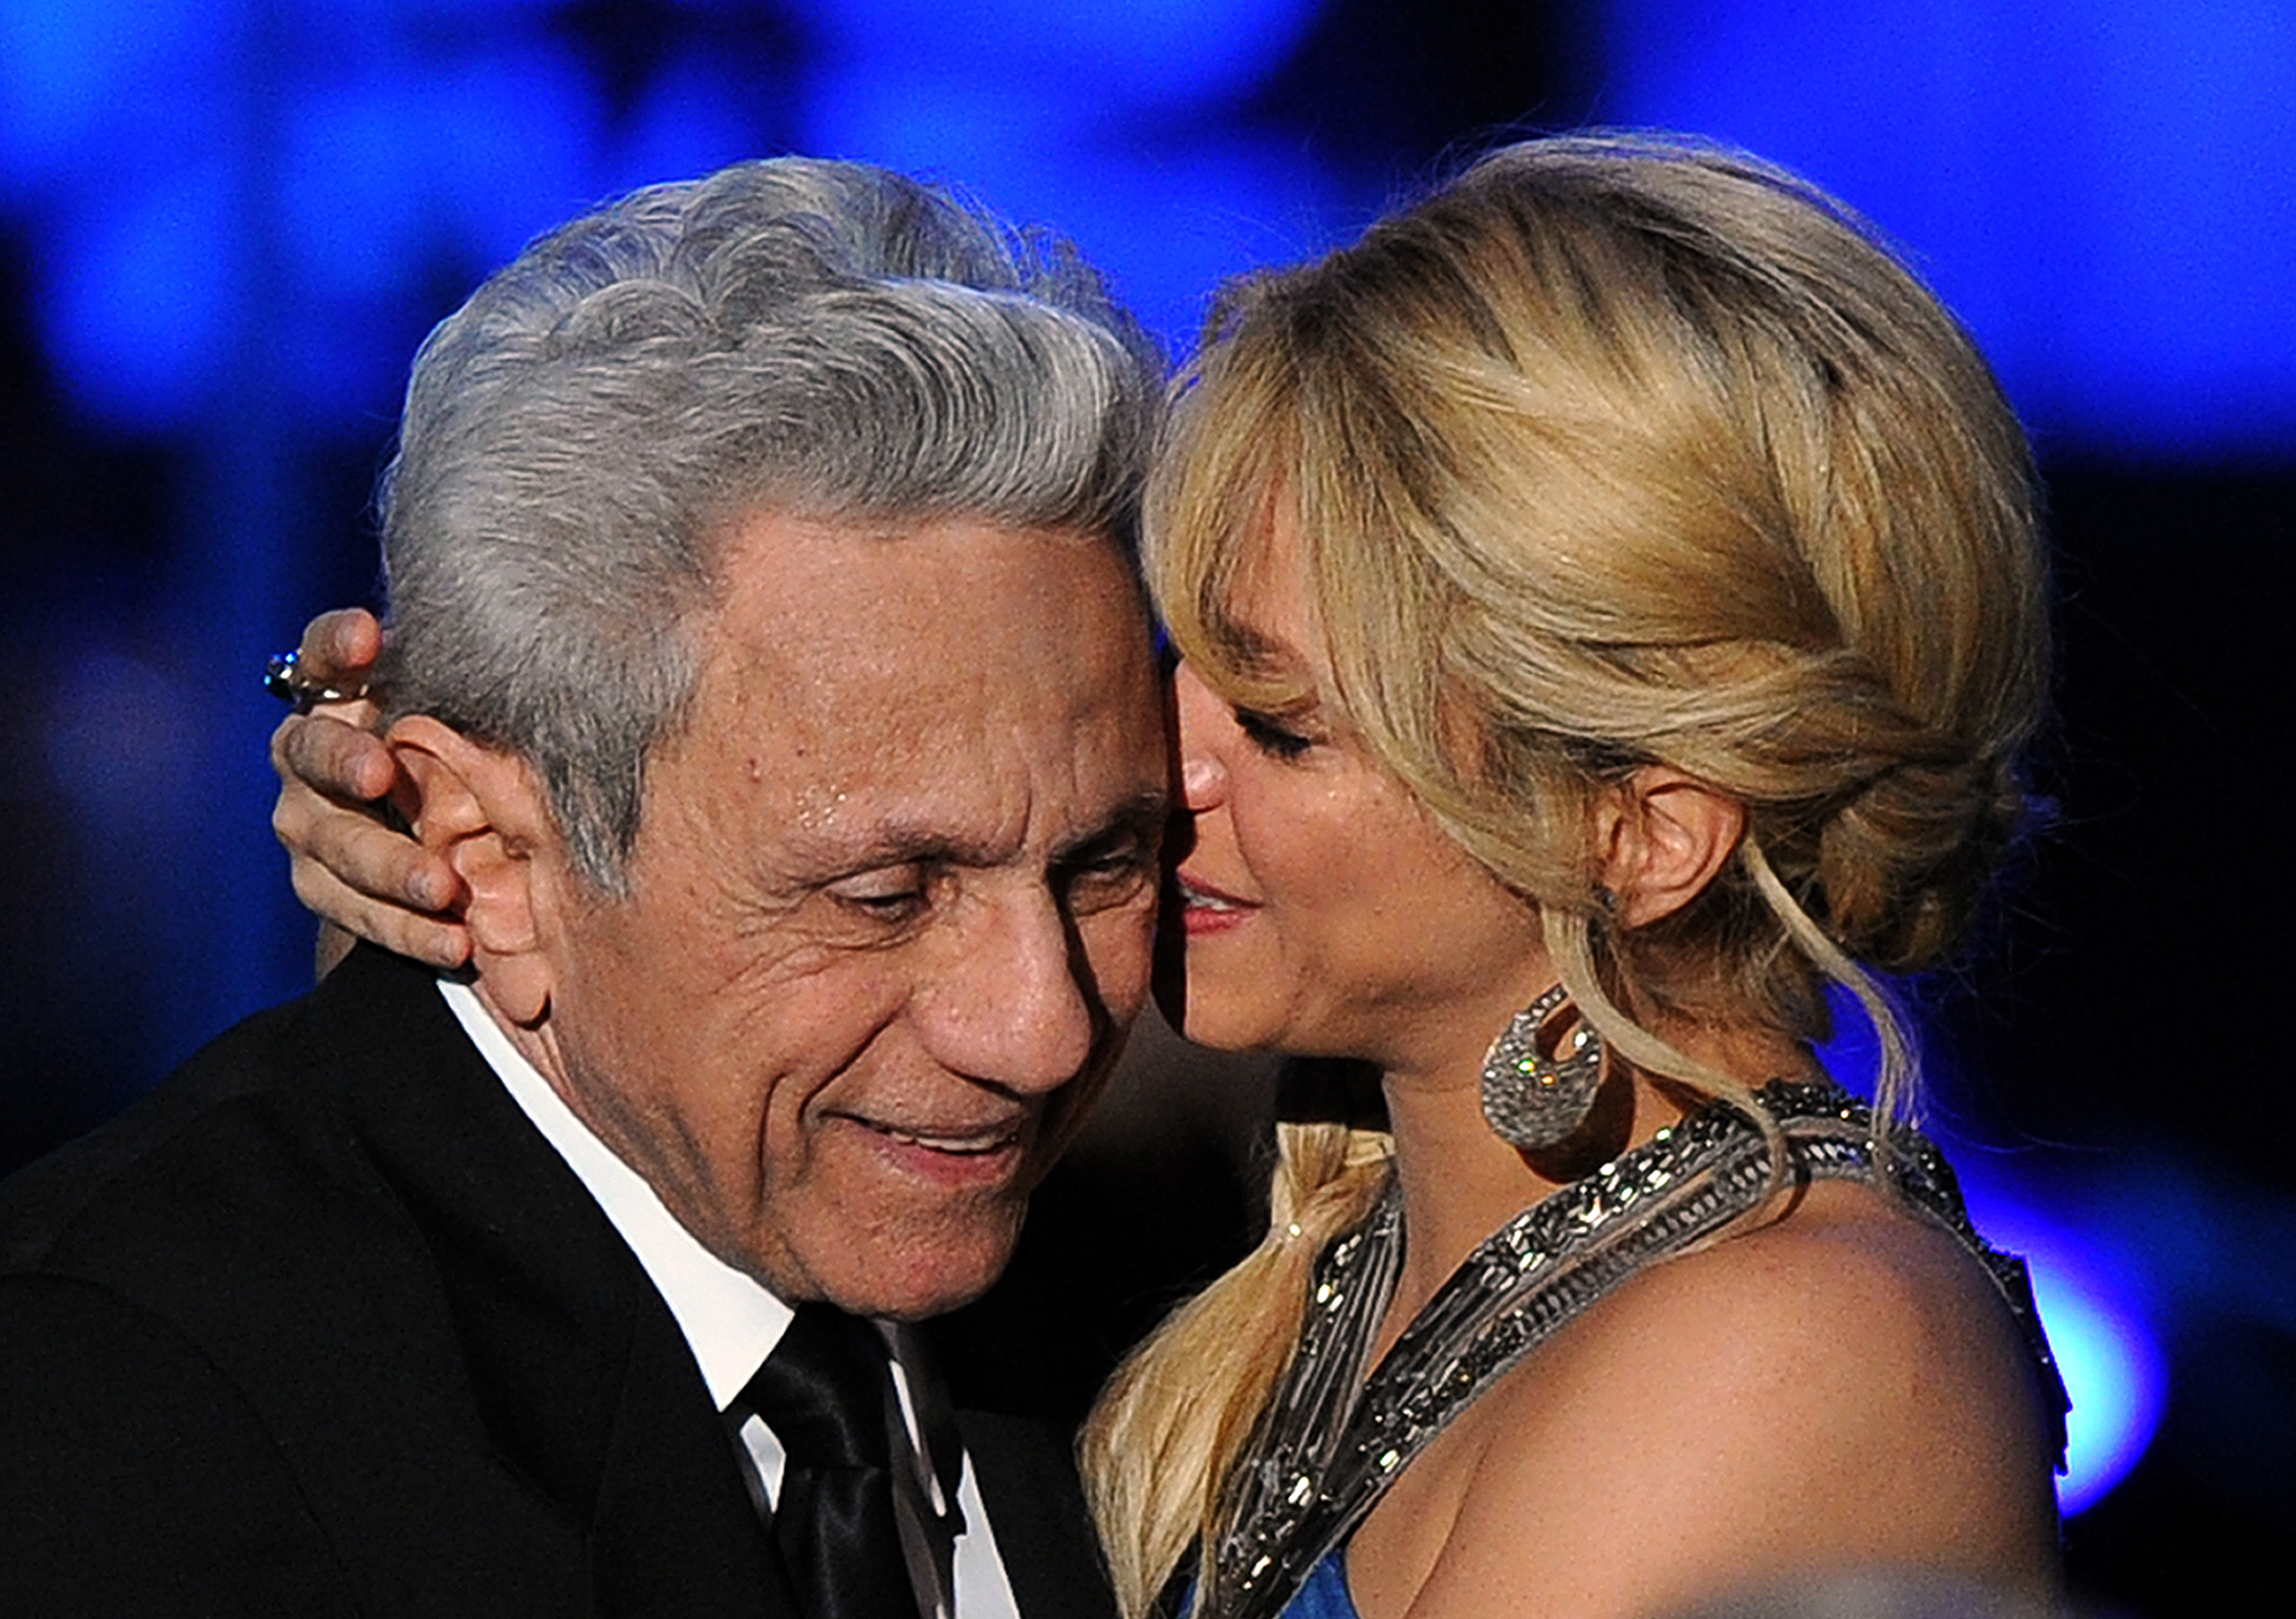 Shakira with her father William Mebarak on November 9, 2011 in Las Vegas, Nevada. | Source: Getty Images